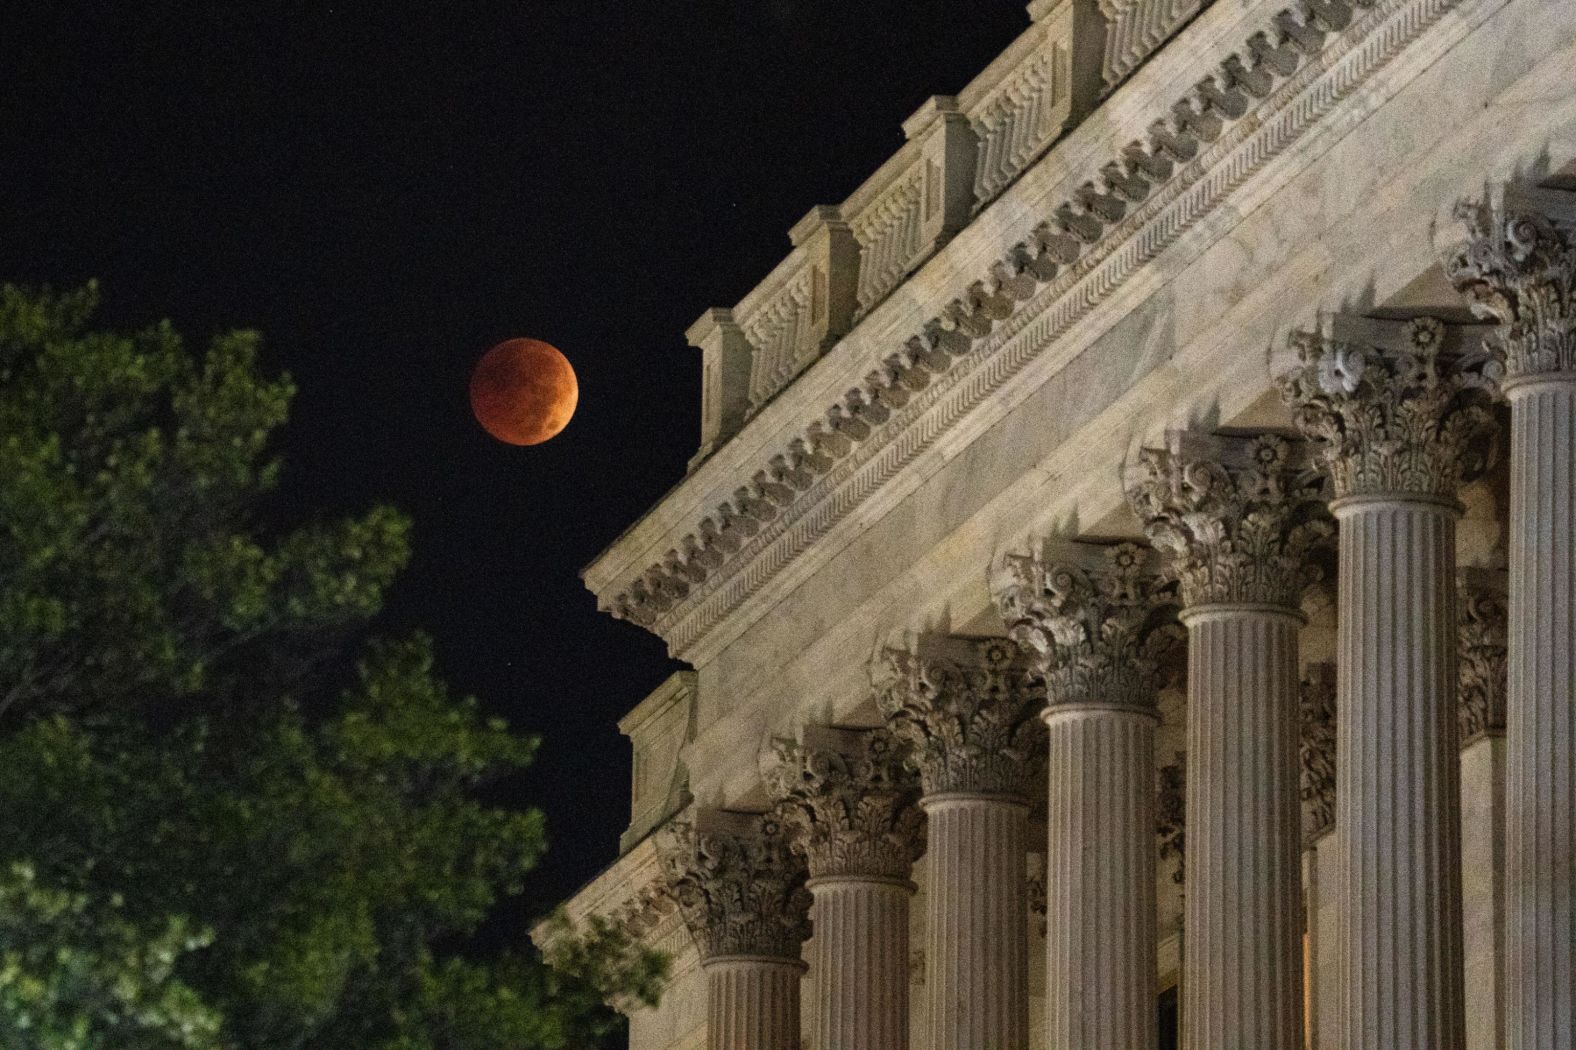 The blood moon sets behind the US Capitol on November 8, in Washington, DC. In a total lunar eclipse, the Earth's atmosphere disperses sunlight, causing the moon's rusty red appearance.